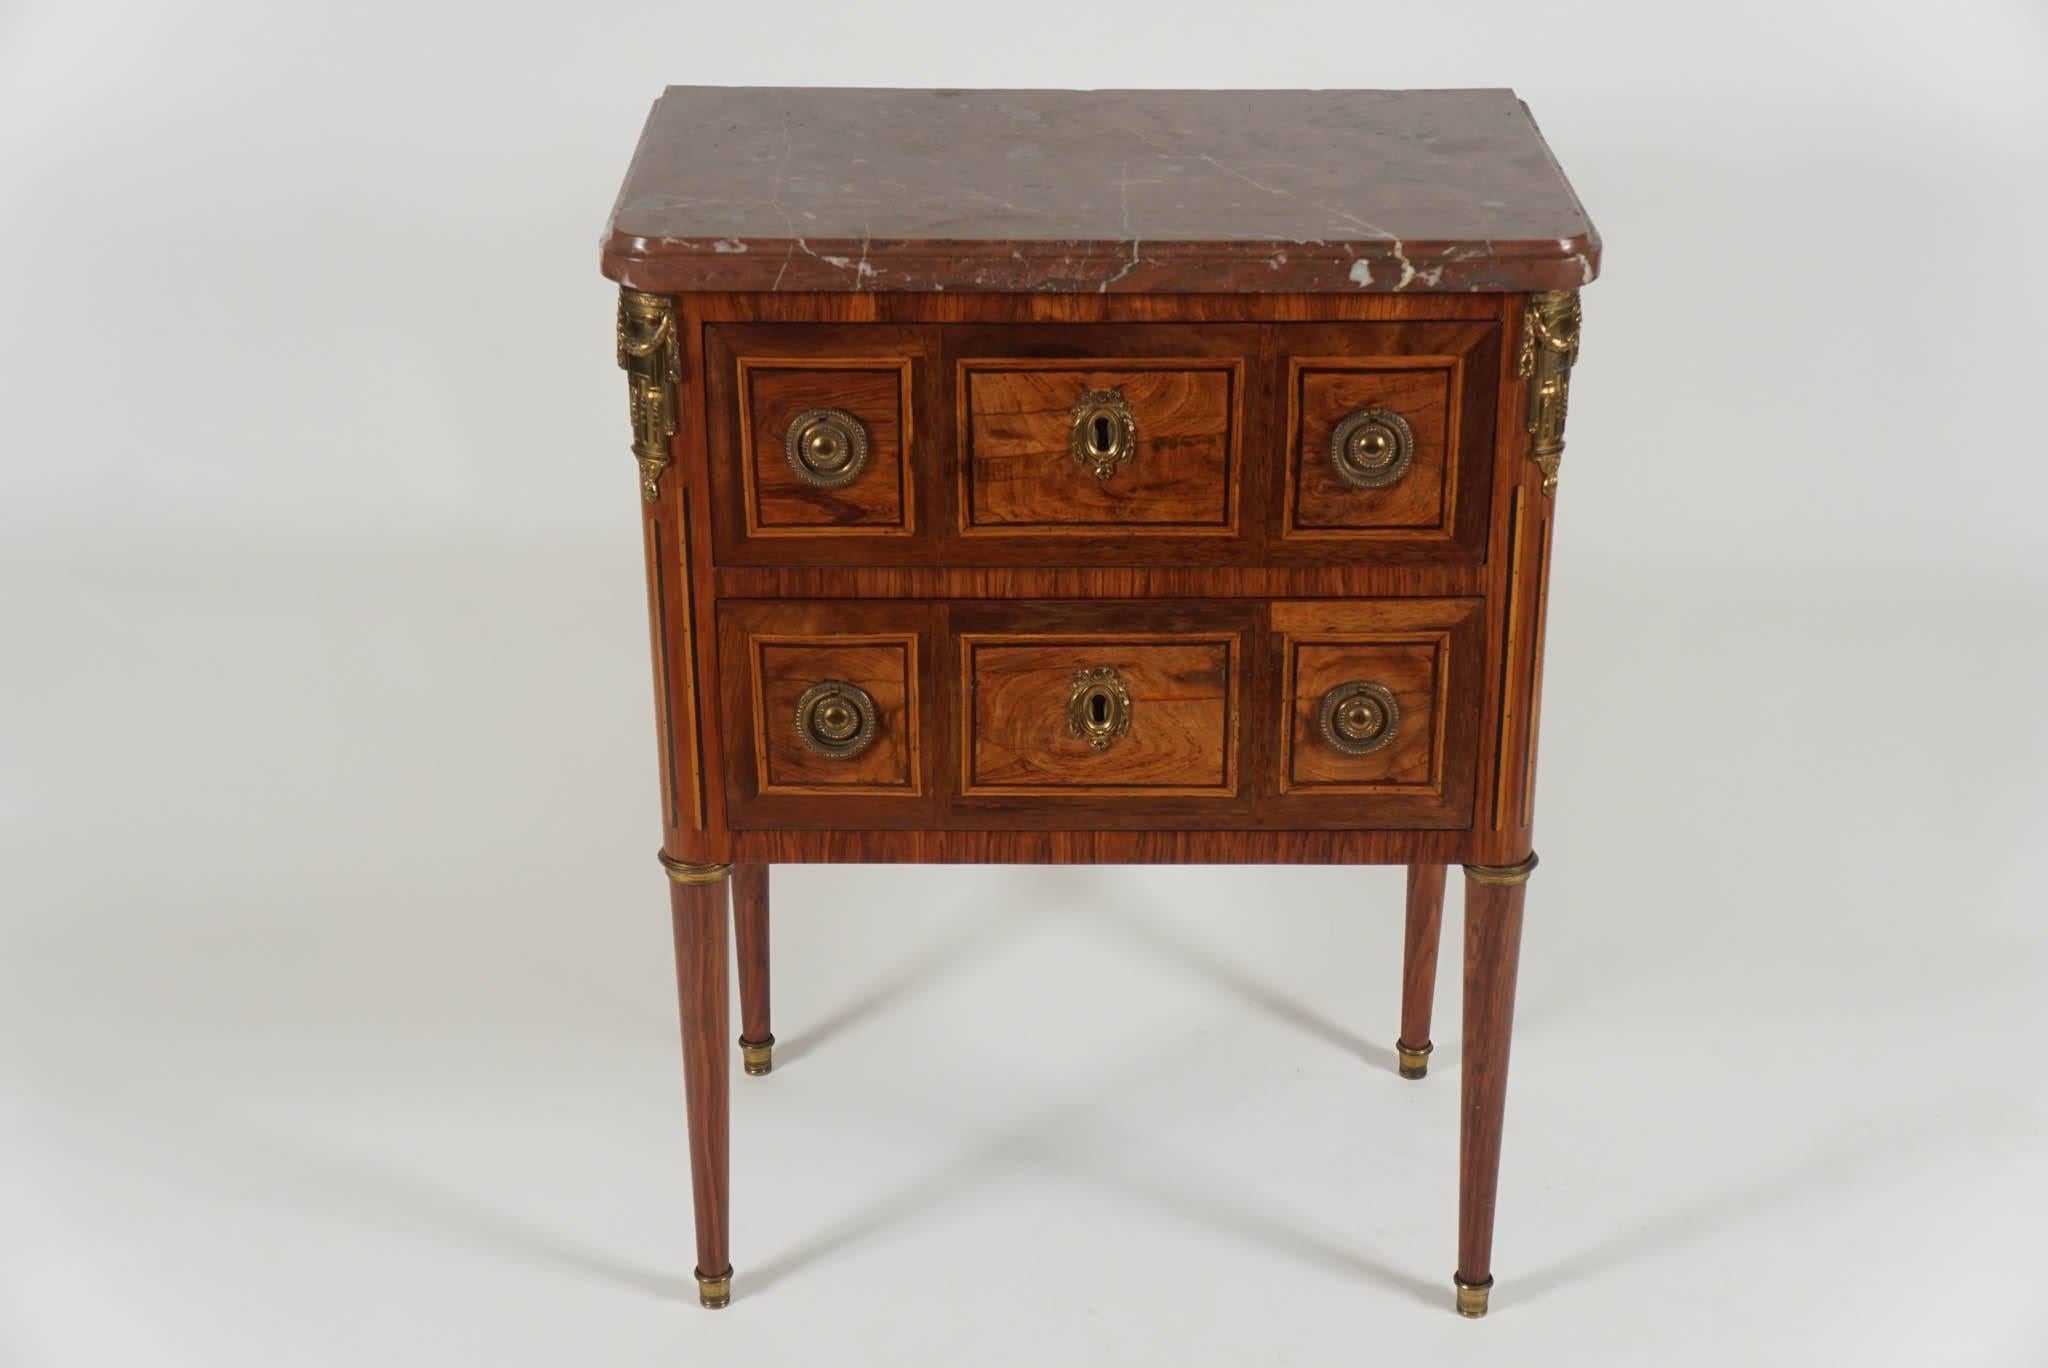 An exquisite, circa 1780, tulipwood, sycamore, kingwood, and ebony inlaid petite commode on stand by important Paris cabinetmaker Conrad Mauter (Maître 1777) having a Rosso Antico marble top above two locking drawers with geometric inlay and ormolu